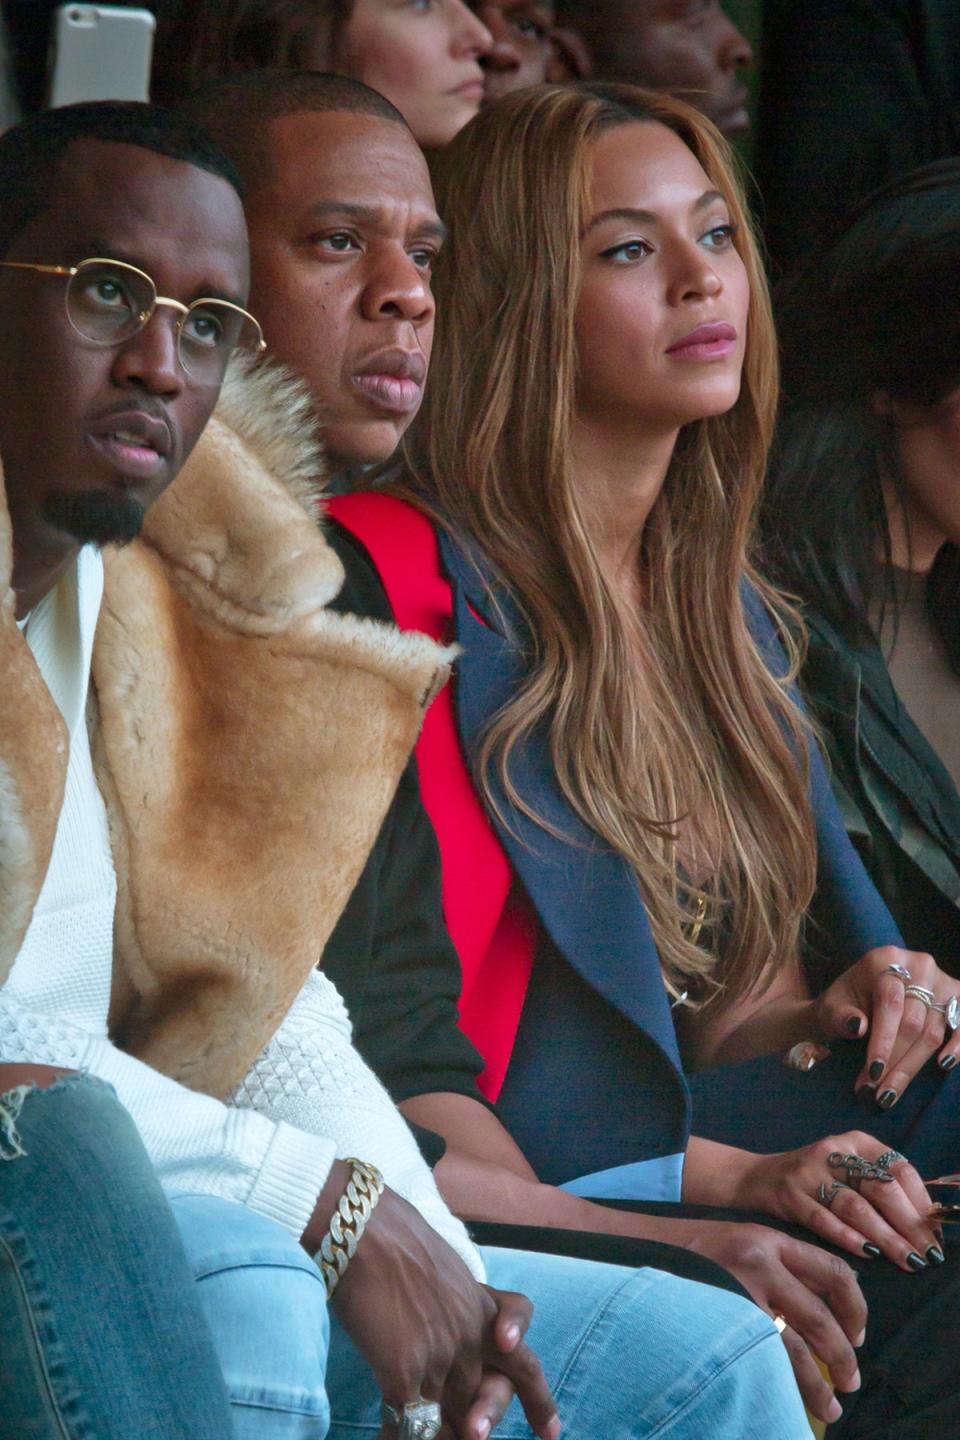 Taking a look: Sean Combs, Jay Z, and Beyonce look engrossed as they watch the catwalk (Picture: AP Photo/Bebeto Matthews) (AP Photo/Bebeto Matthews)